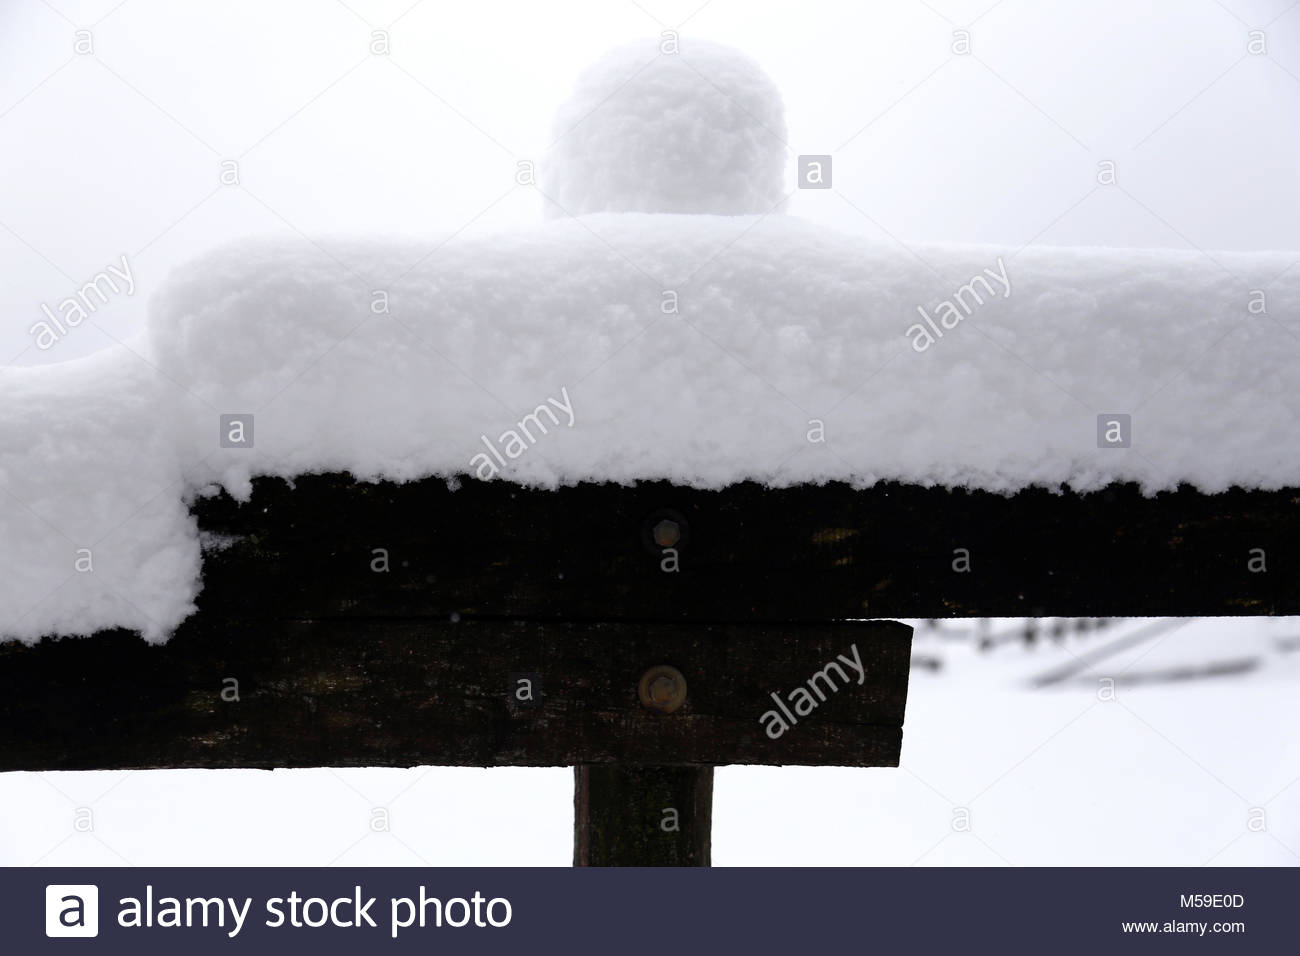 Closeup Of Snowy Corral Poles As A Winter Background Stock Photo